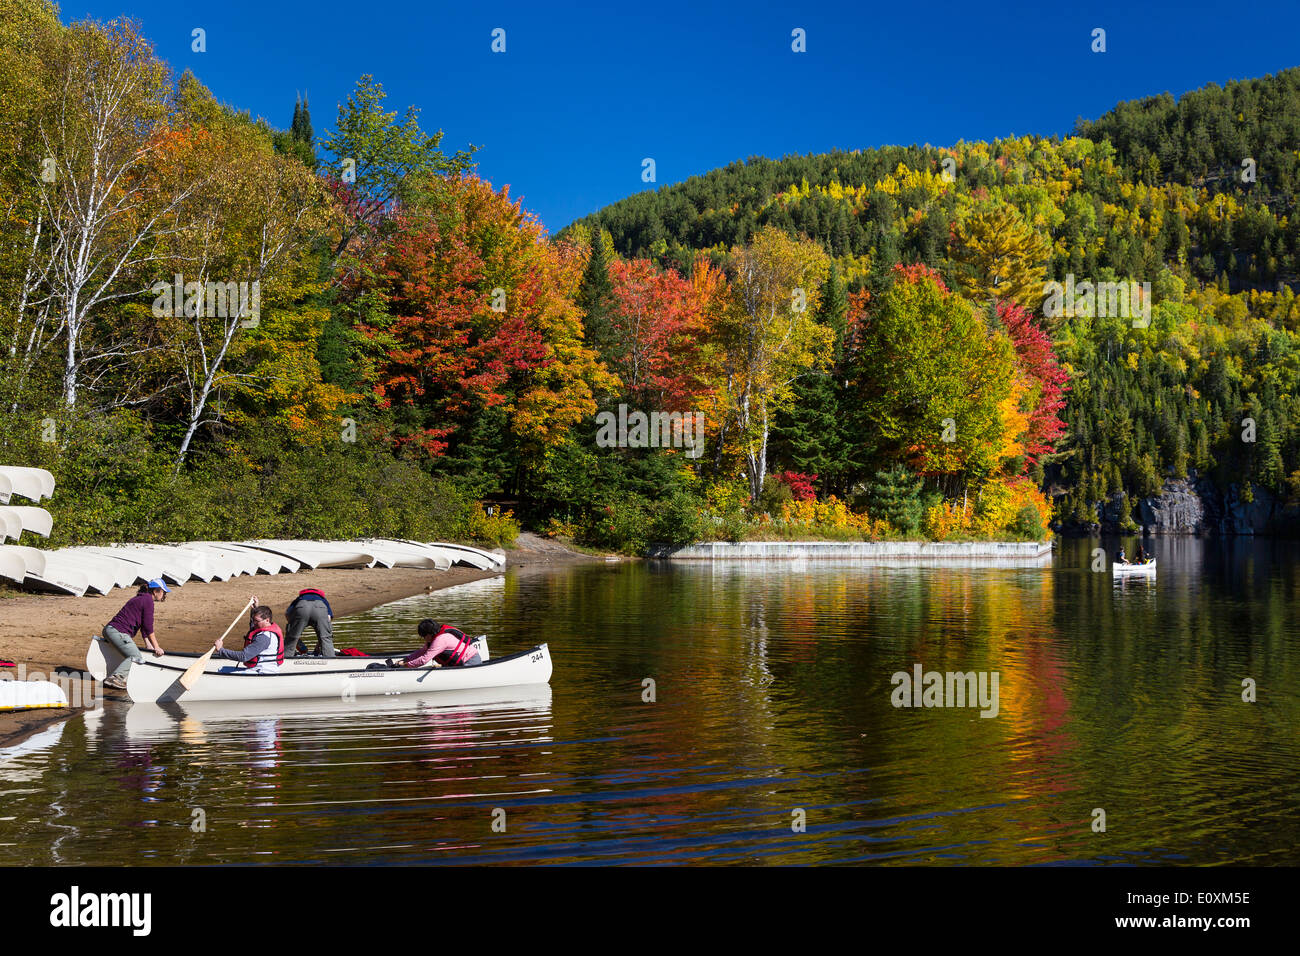 Canoing on a lake with fall foliage color in La Maurice National Park, Quebec, Canada. Stock Photo